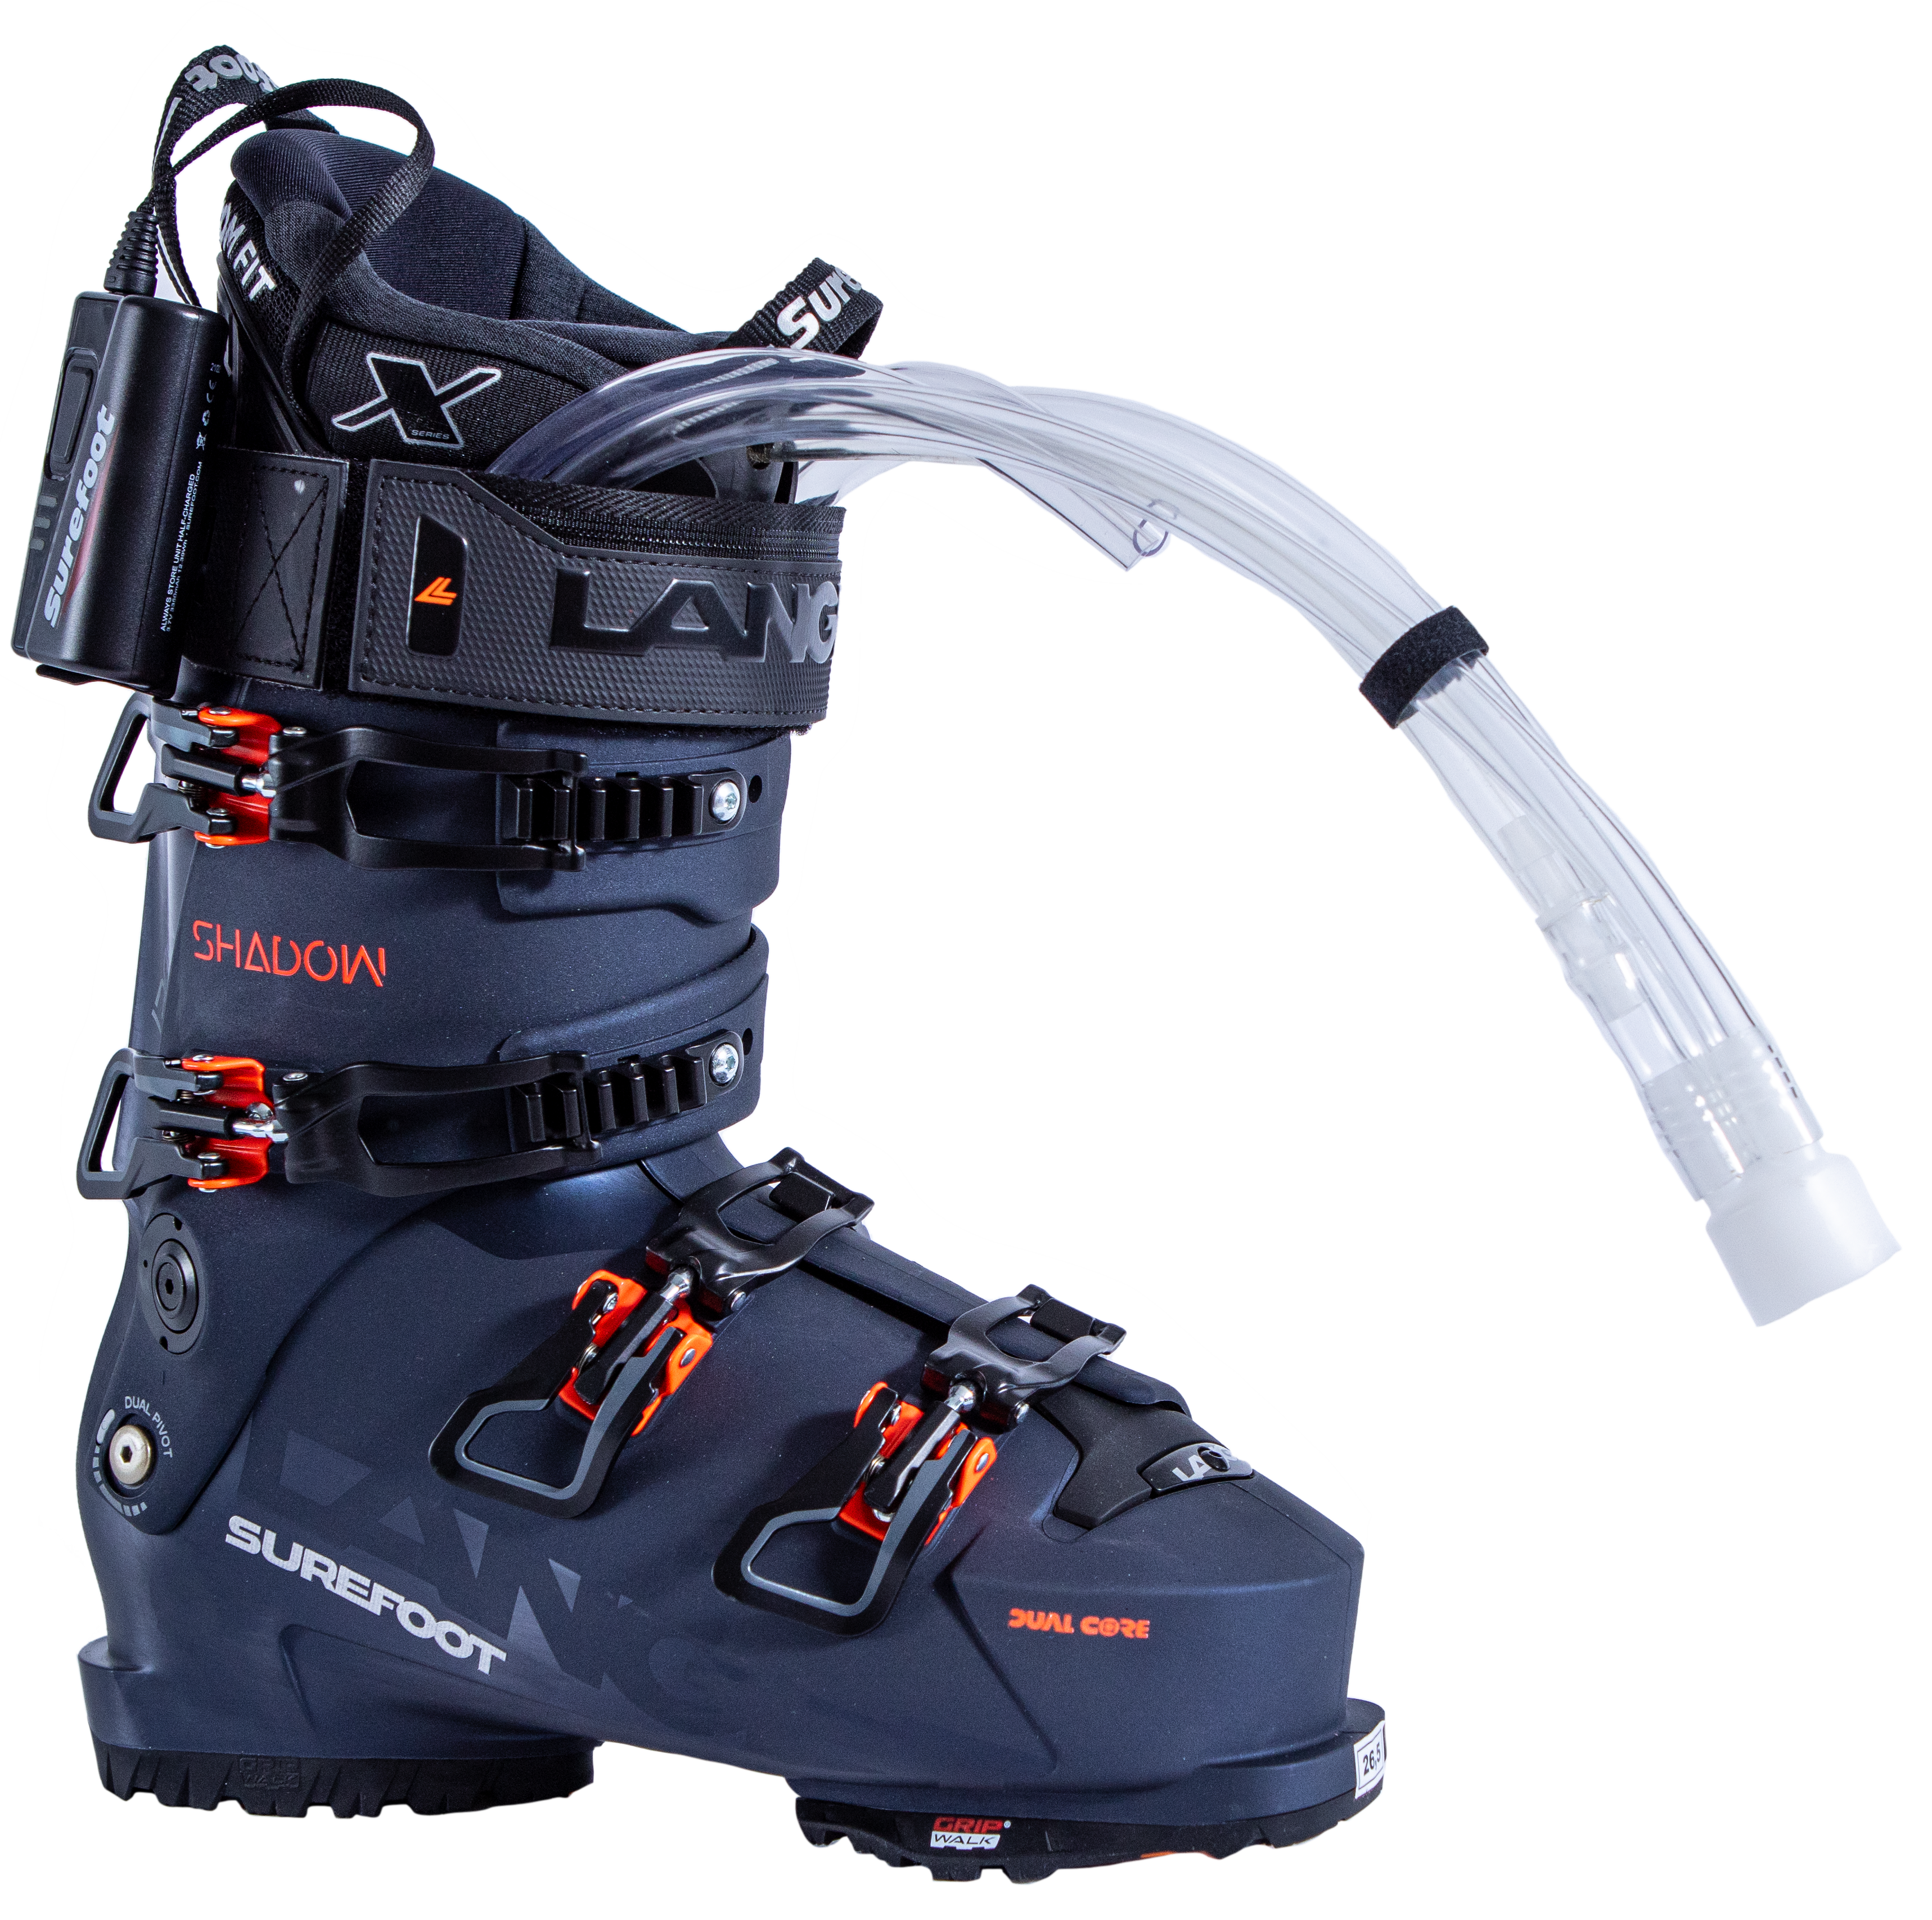 Surefoot Lange Shadow 130 LV matte blue-grey ski boot shell with orange accents on buckles and Lange logo in black on power strap, Surefoot logo in white. Plastic tubes coming out for Surefoot memory foam injection into shell lining. Winterheat ski boot heater attached to outside edge.